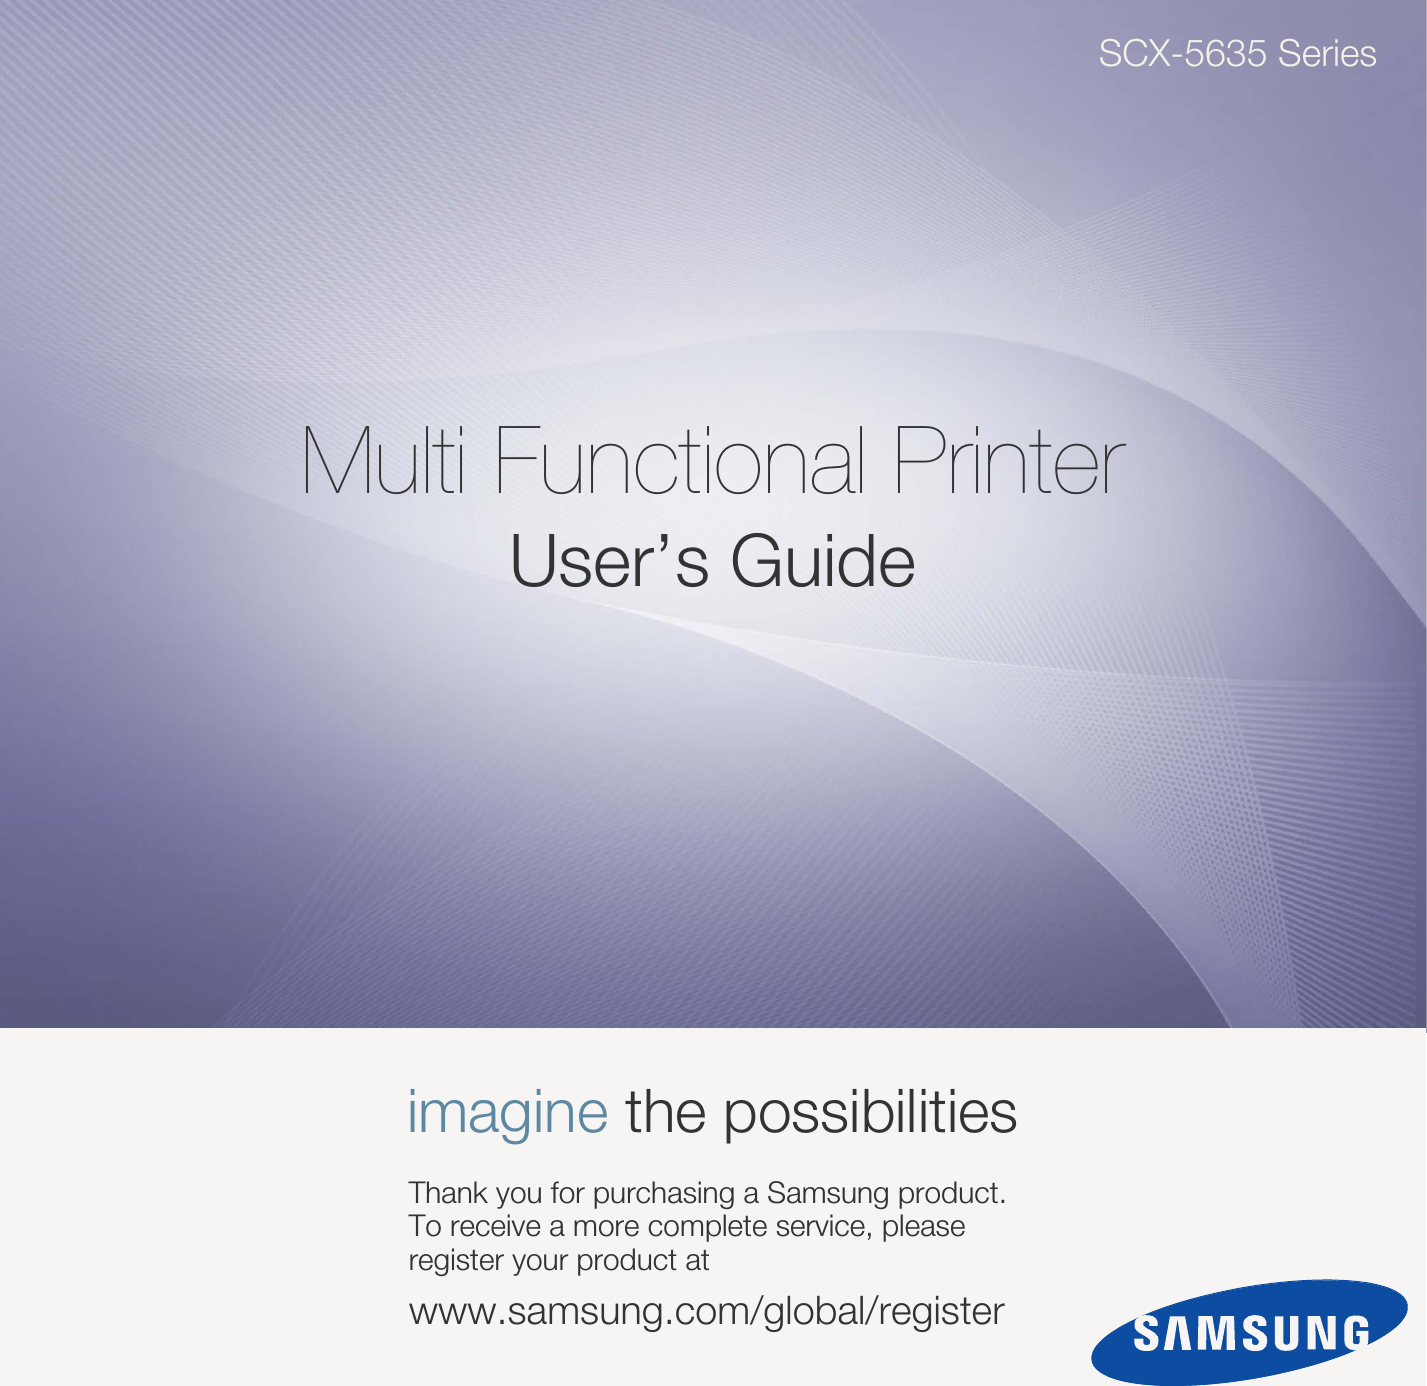 SCX-5635 SeriesMulti Functional PrinterUser’s Guideimagine the possibilitiesThank you for purchasing a Samsung product. To receive a more complete service, please register your product atwww.samsung.com/global/register